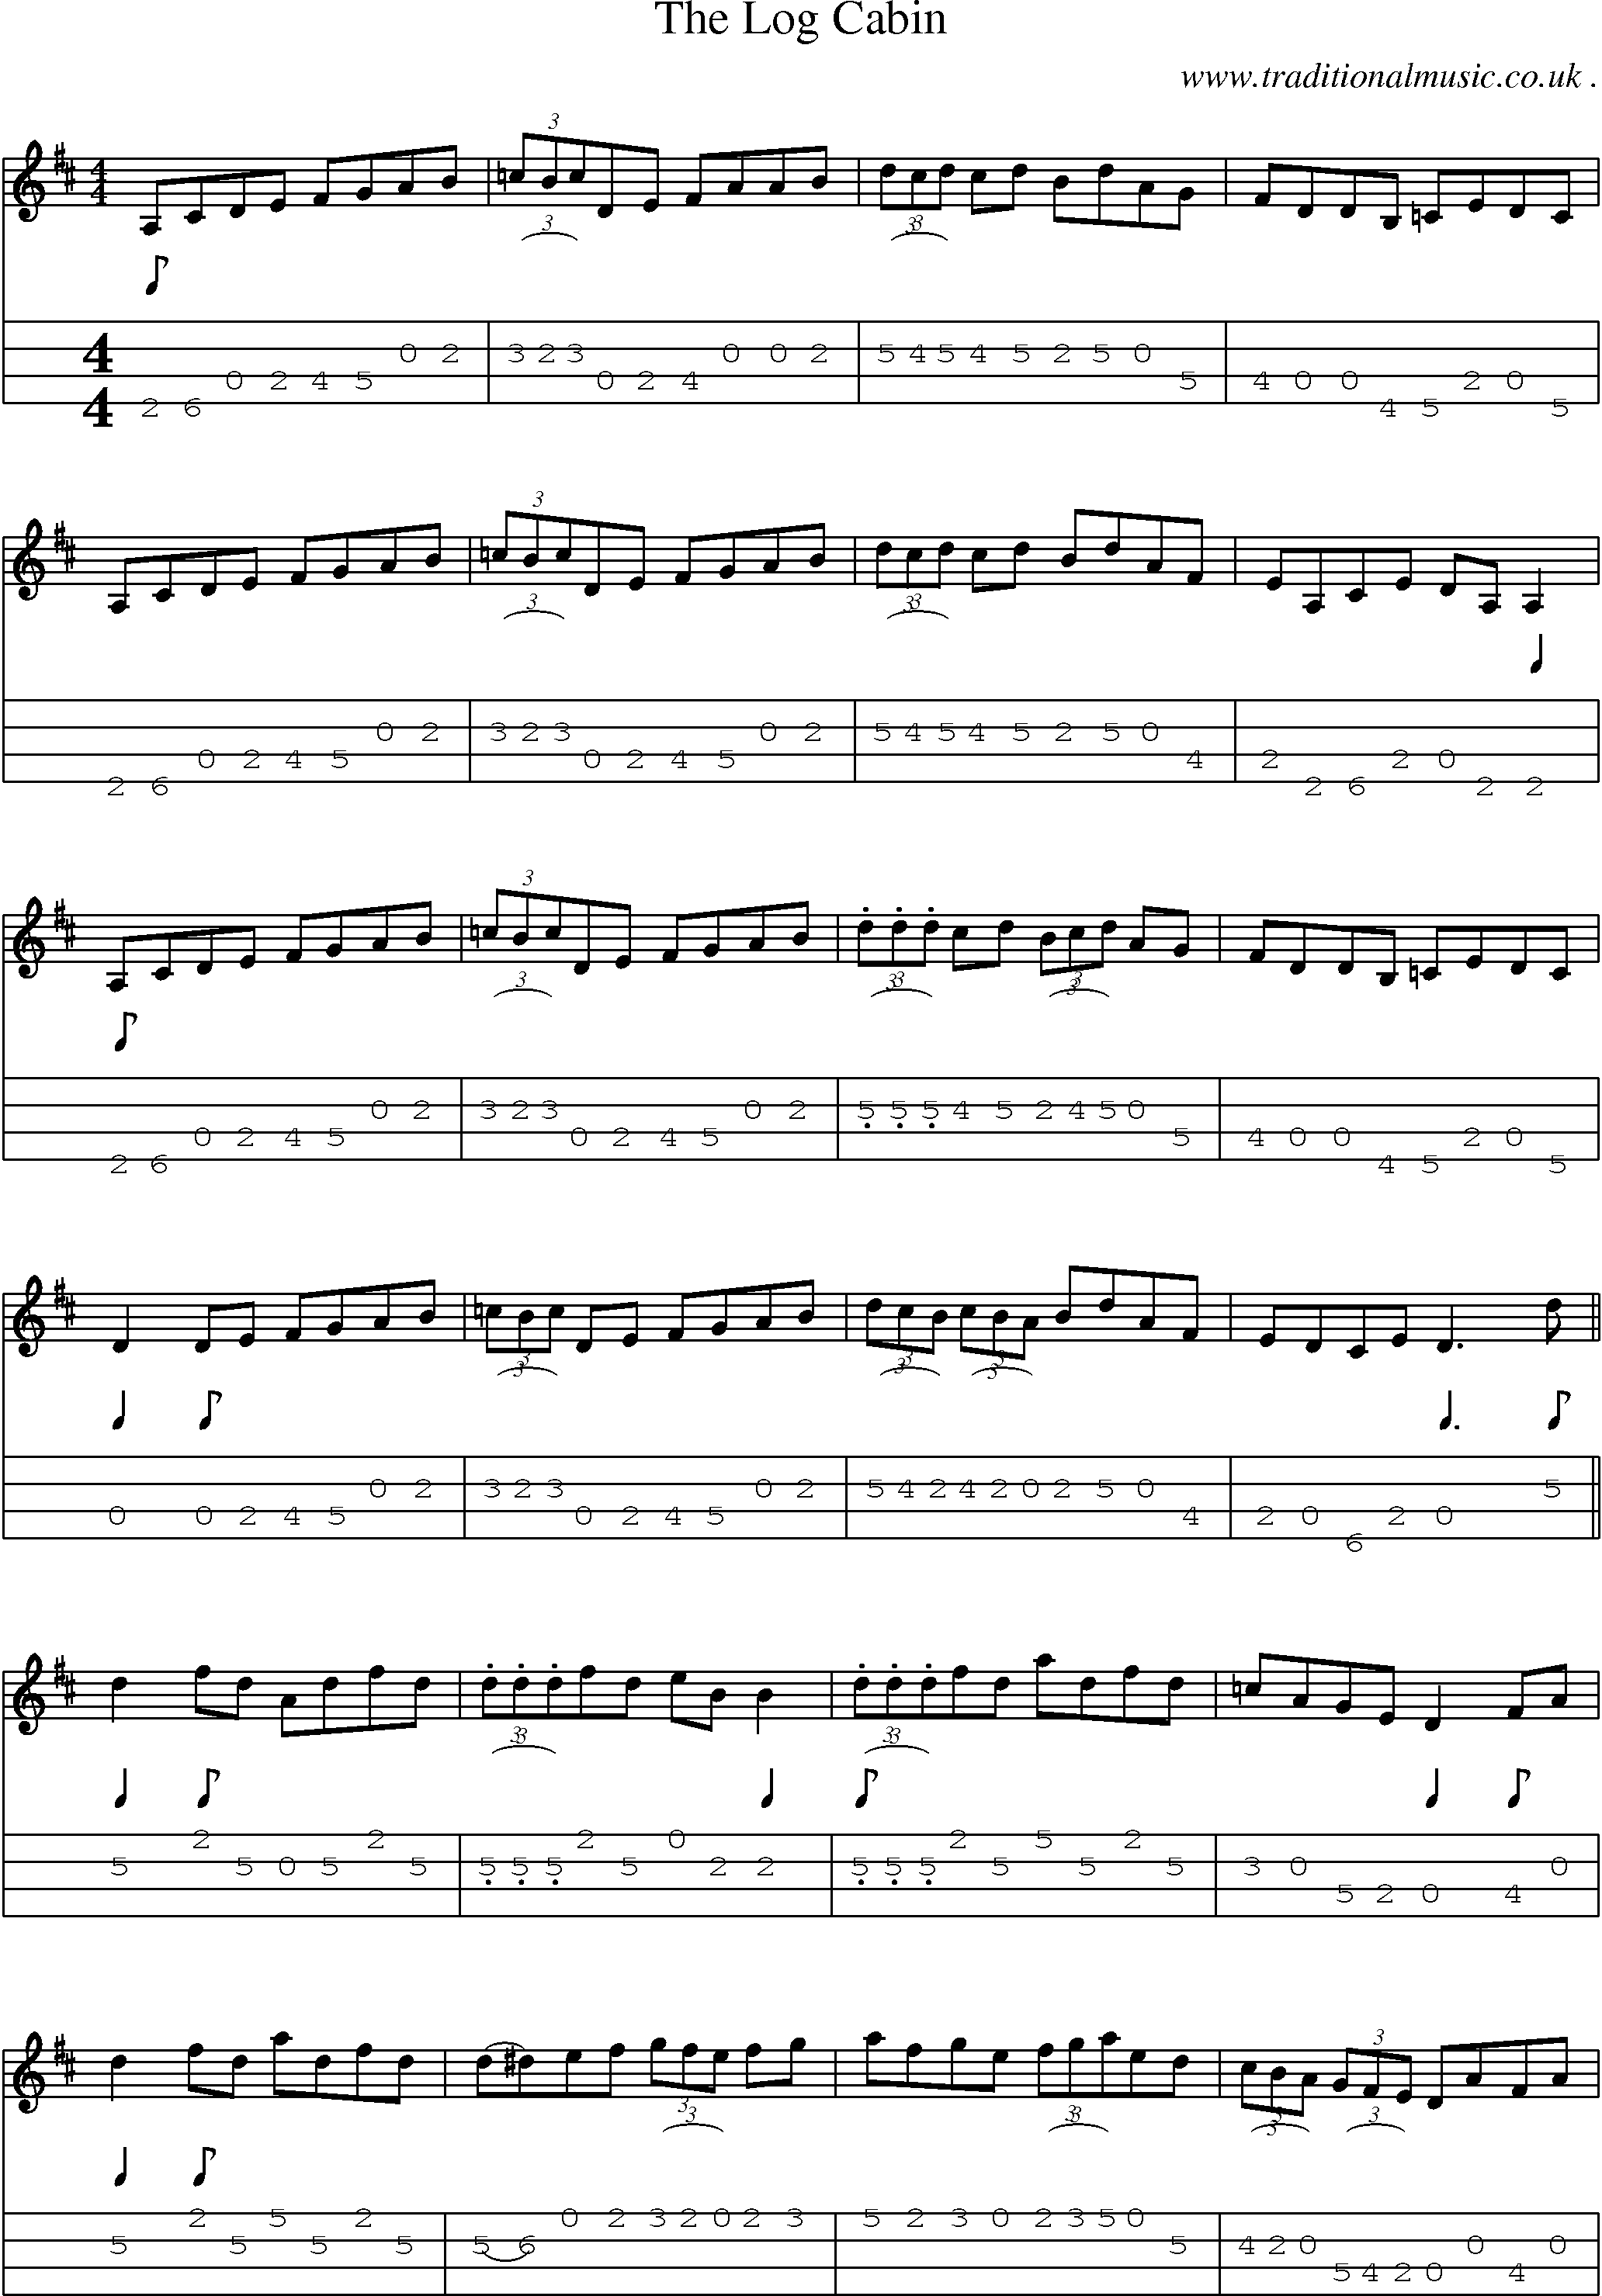 Sheet-Music and Mandolin Tabs for The Log Cabin